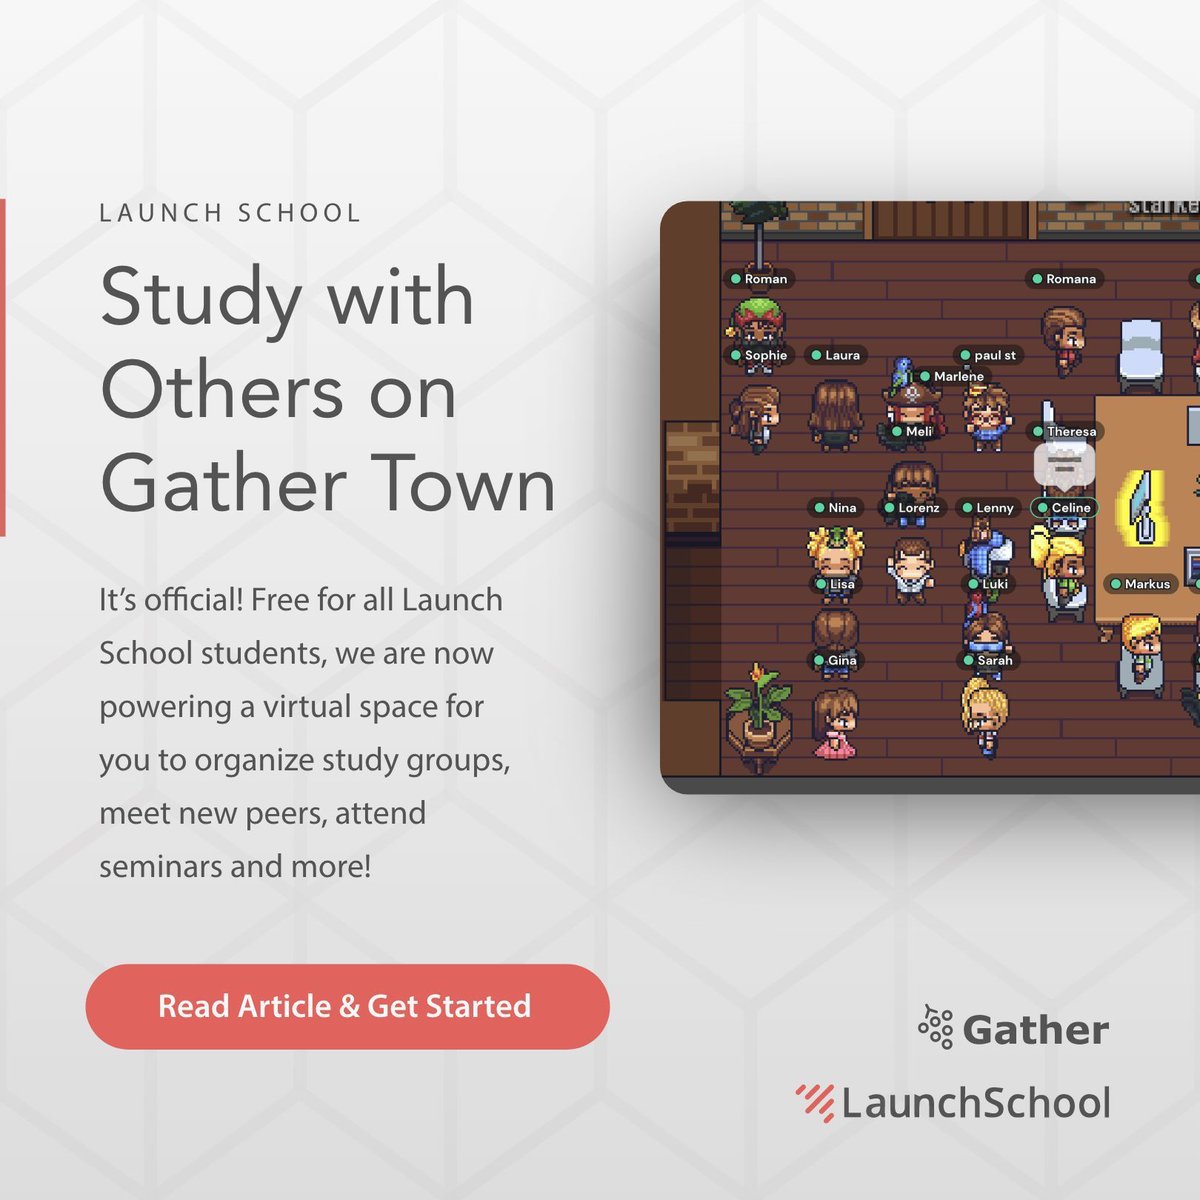 How to login to Gather: buff.ly/3JMLg3J

If you're looking to study with others, check out Gather at Launch School! Walk around and virtually meet other students, study, code and connect with staff and more.

#codingisfun #softwareengineer #learnprogramming